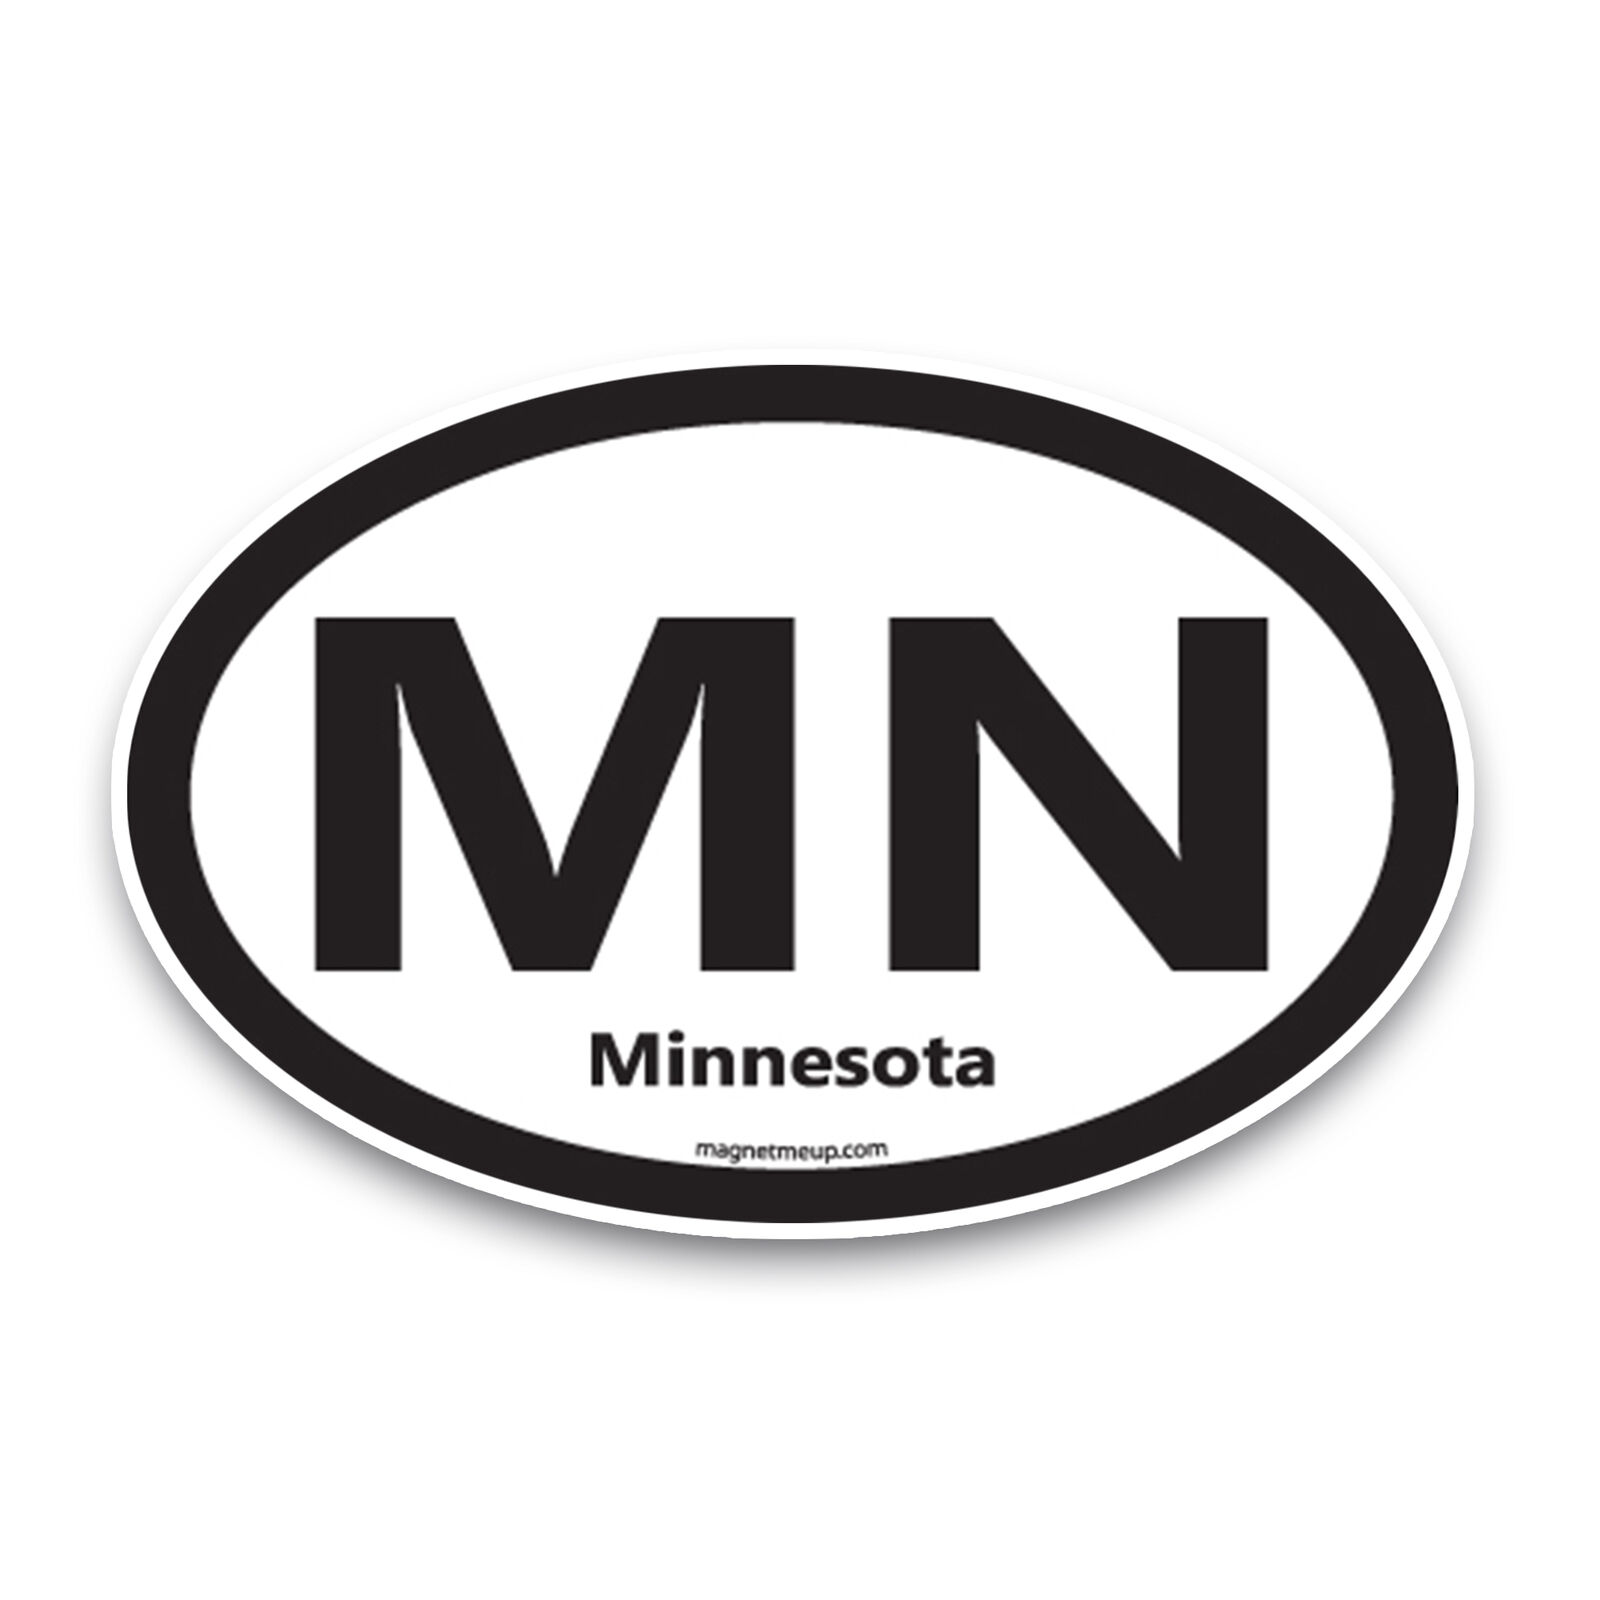 MN Minnesota US State Oval Magnet Decal, 4x6 Inches, Automotive Magnet